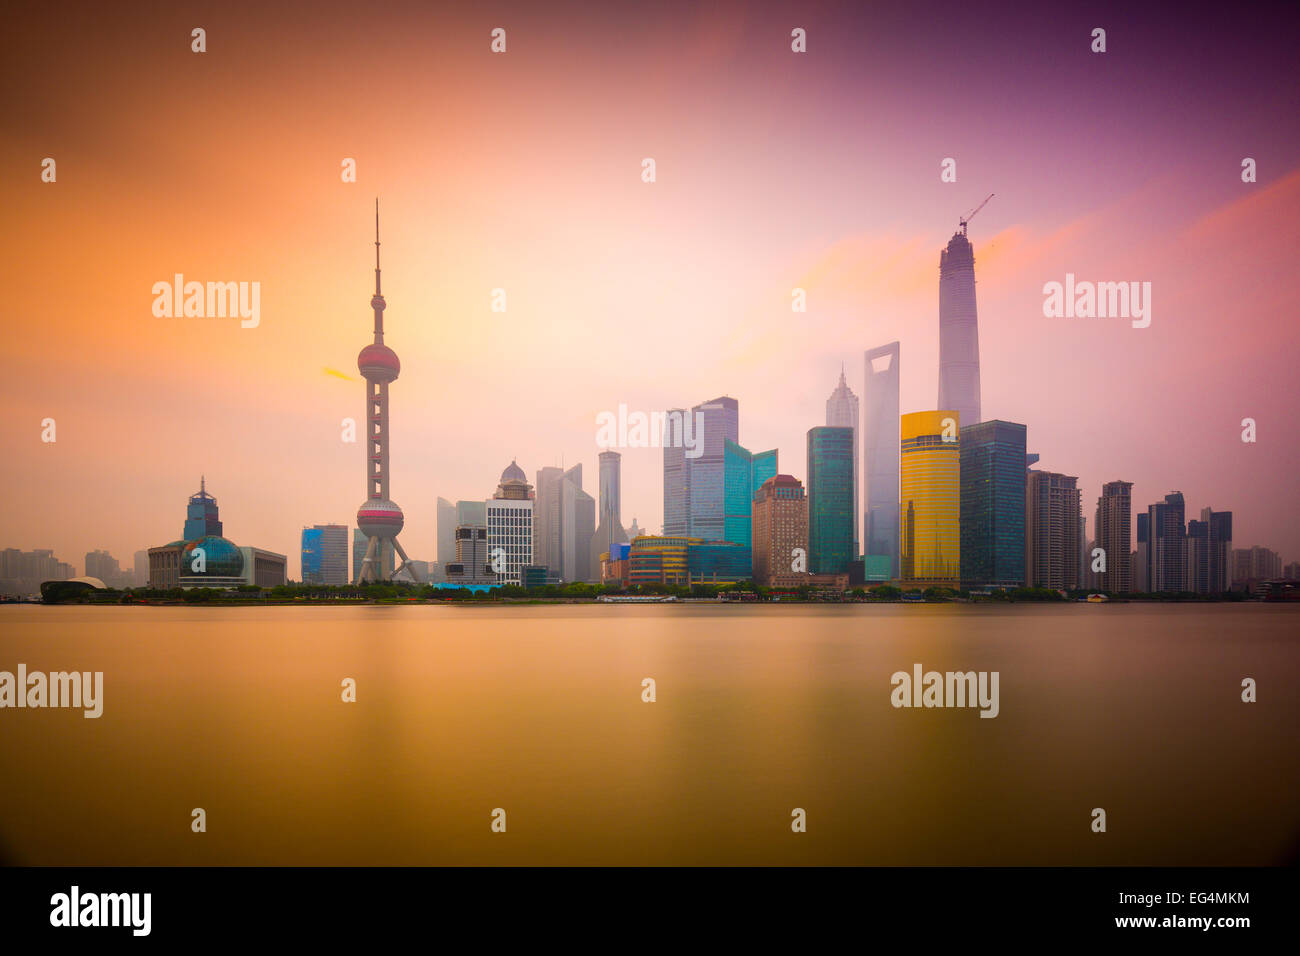 Shanghai, China cityscape viewed across the Huangpu River at dawn. Stock Photo